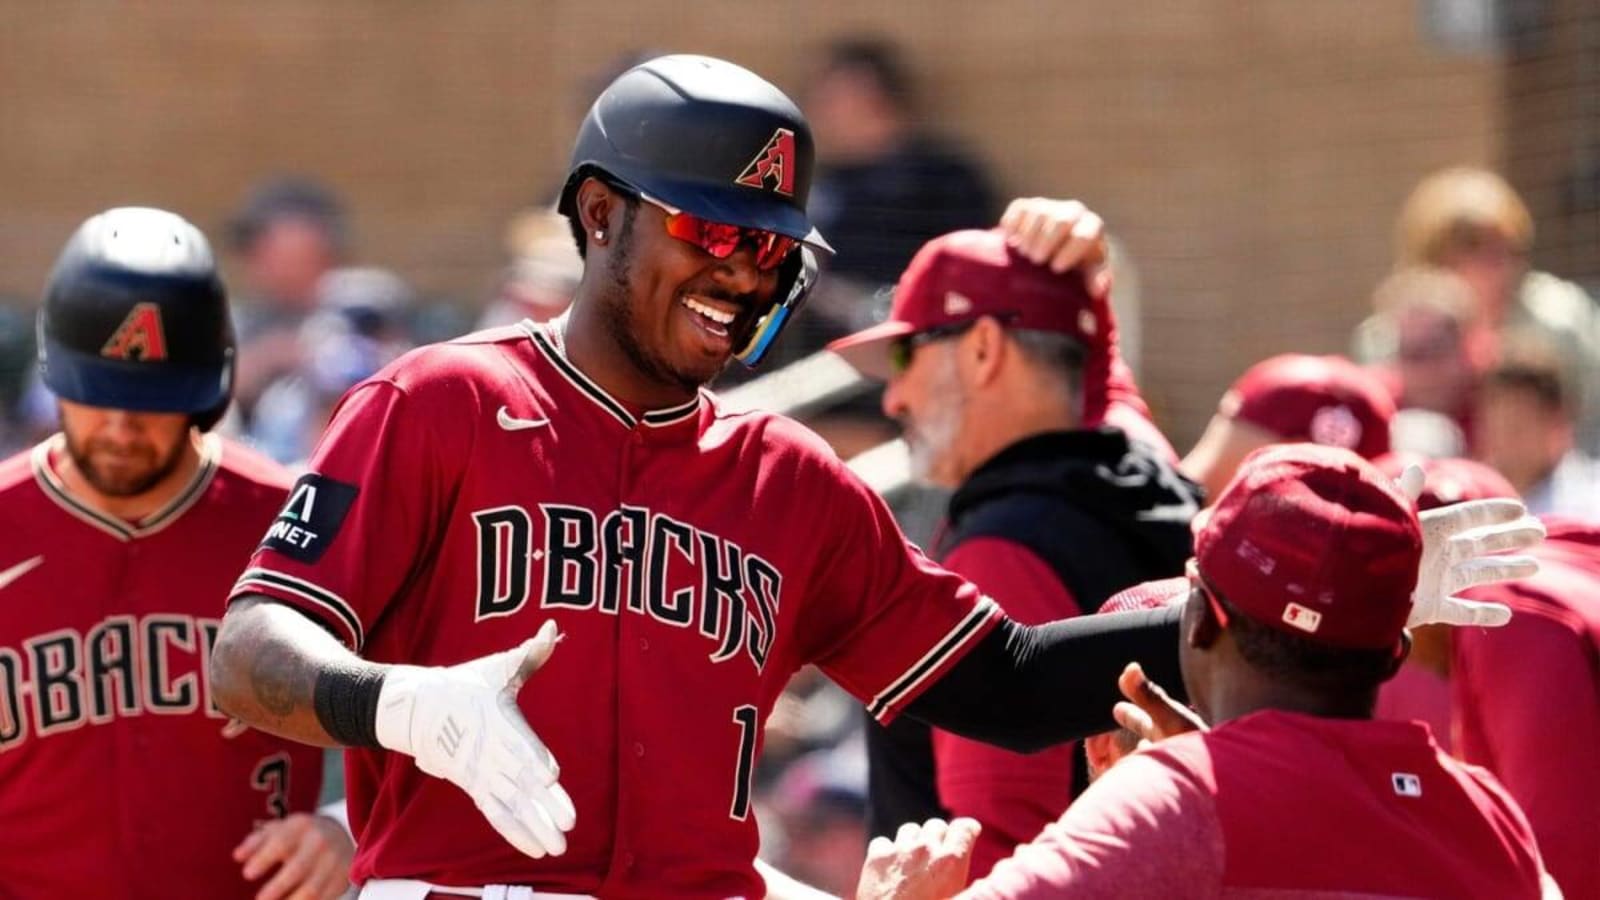 Diamondbacks: Former Rookie of the Year Ready to Make an Impact on New Team